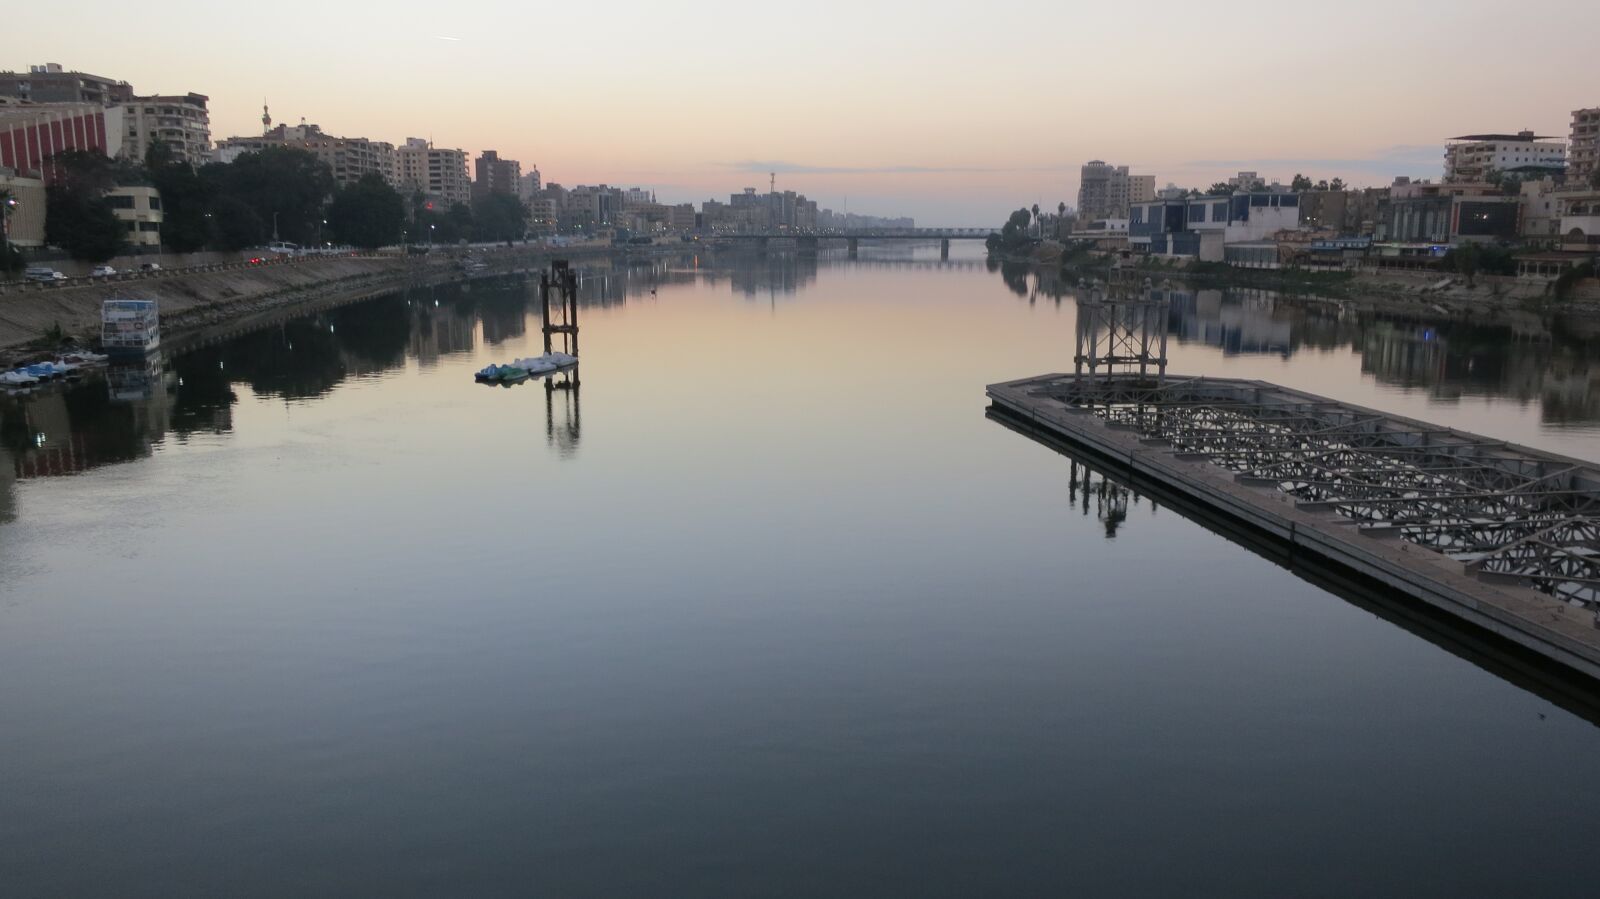 Canon PowerShot S100 sample photo. "The nile river, river" photography